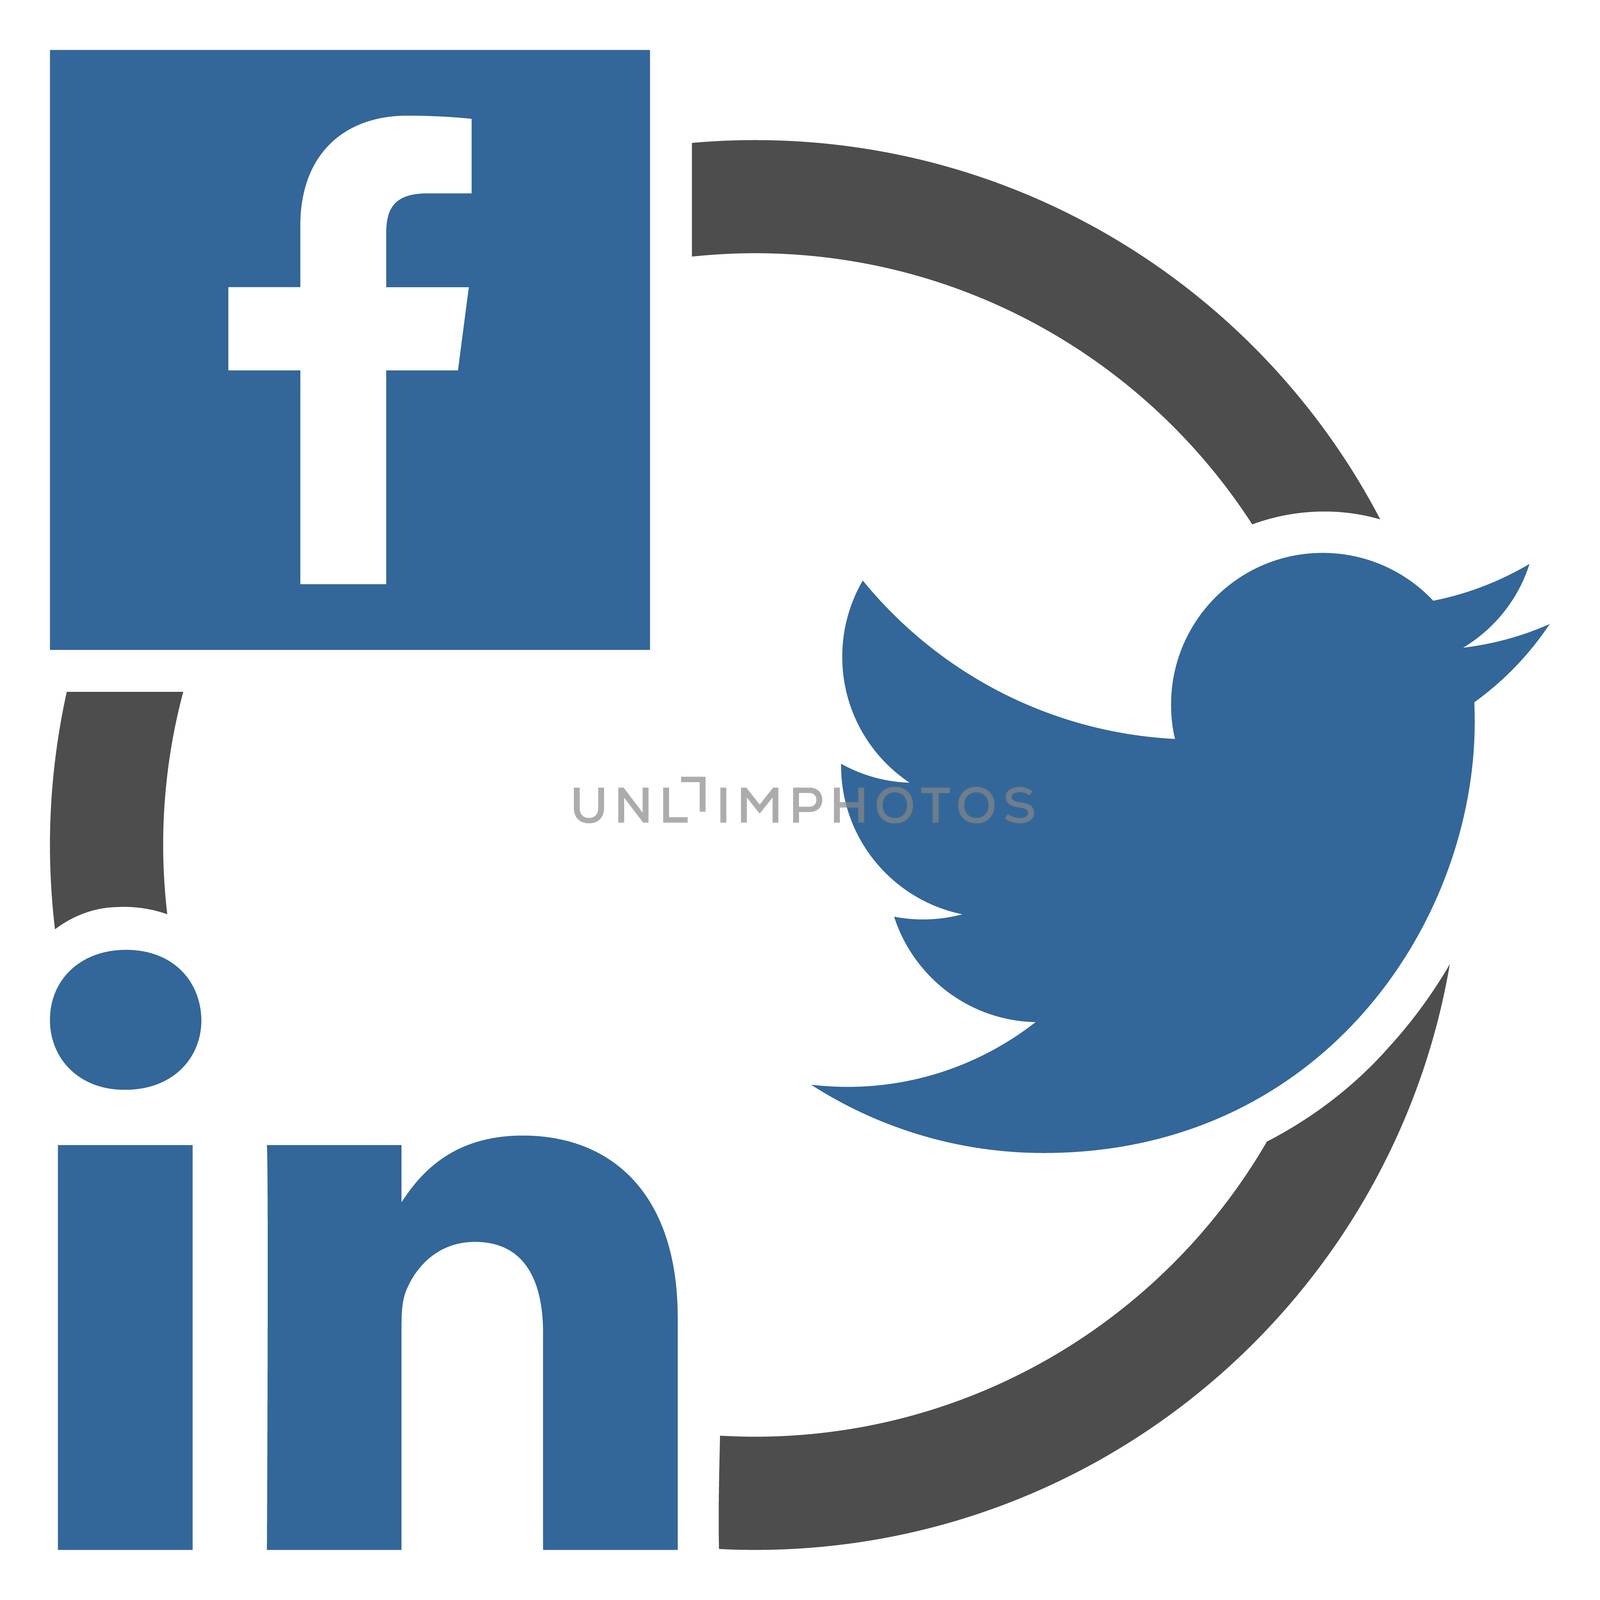 Social Networks Icon. This flat glyph symbol uses cobalt and gray colors, and isolated on a white background.